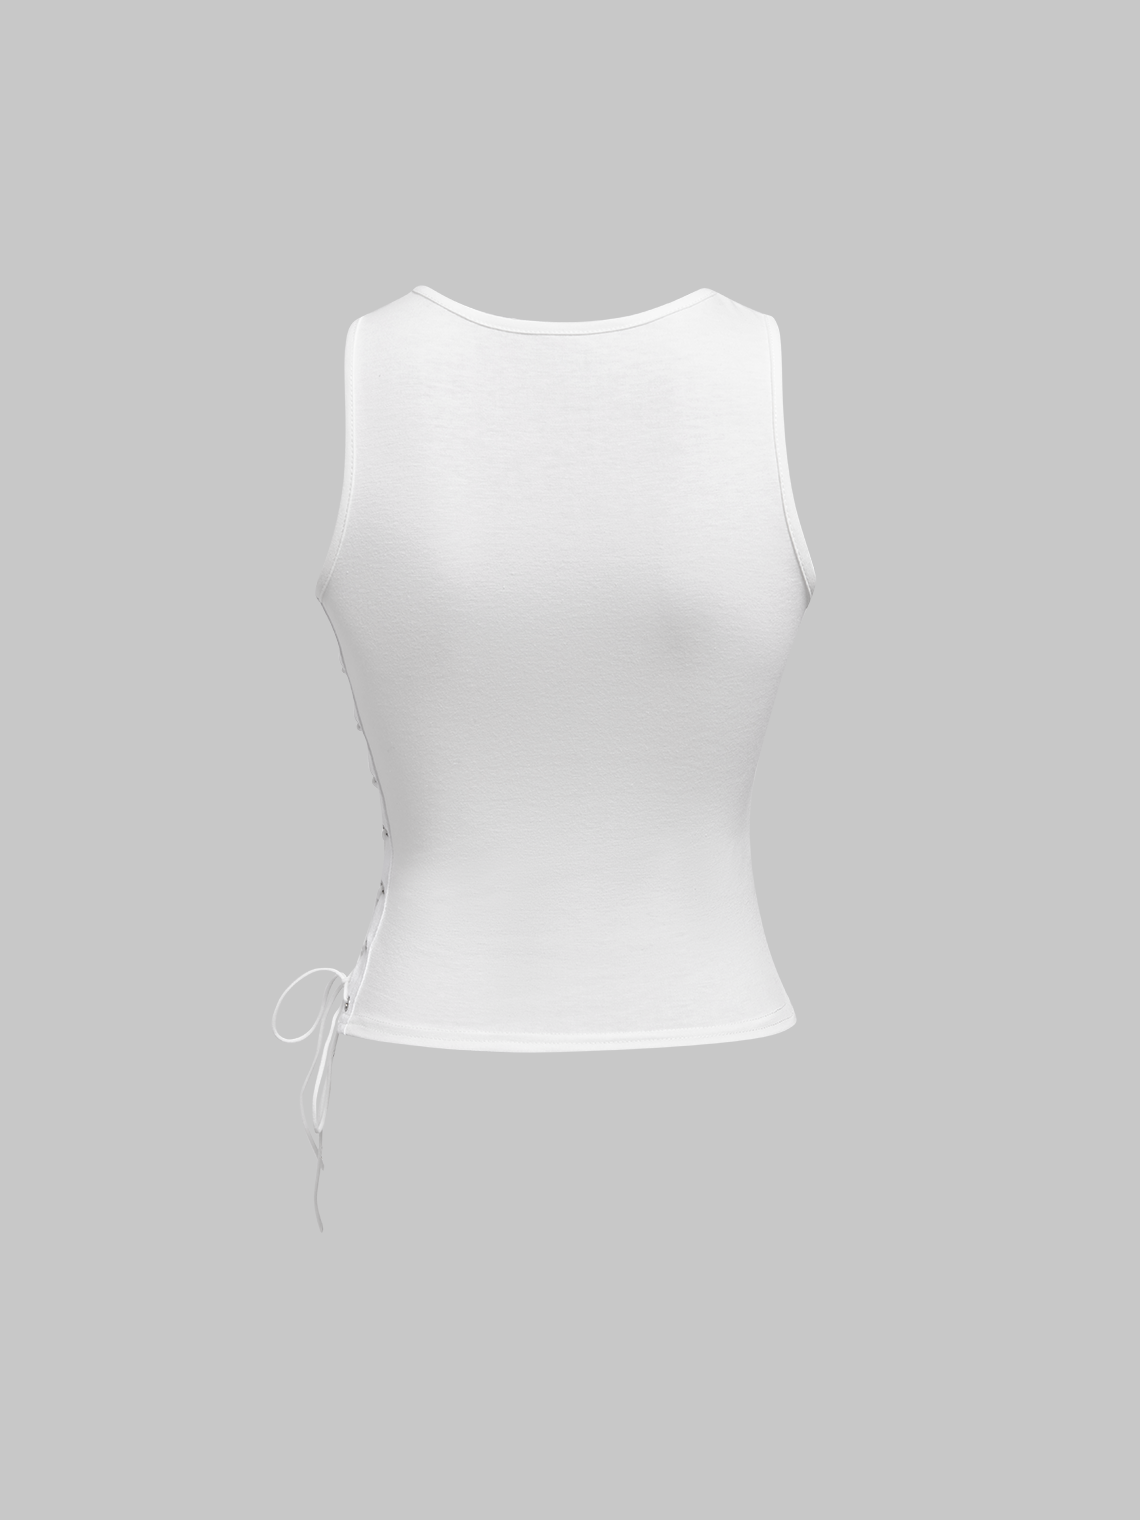 Activewear Street White Lace up Symmetrical design Top Tank Top & Cami